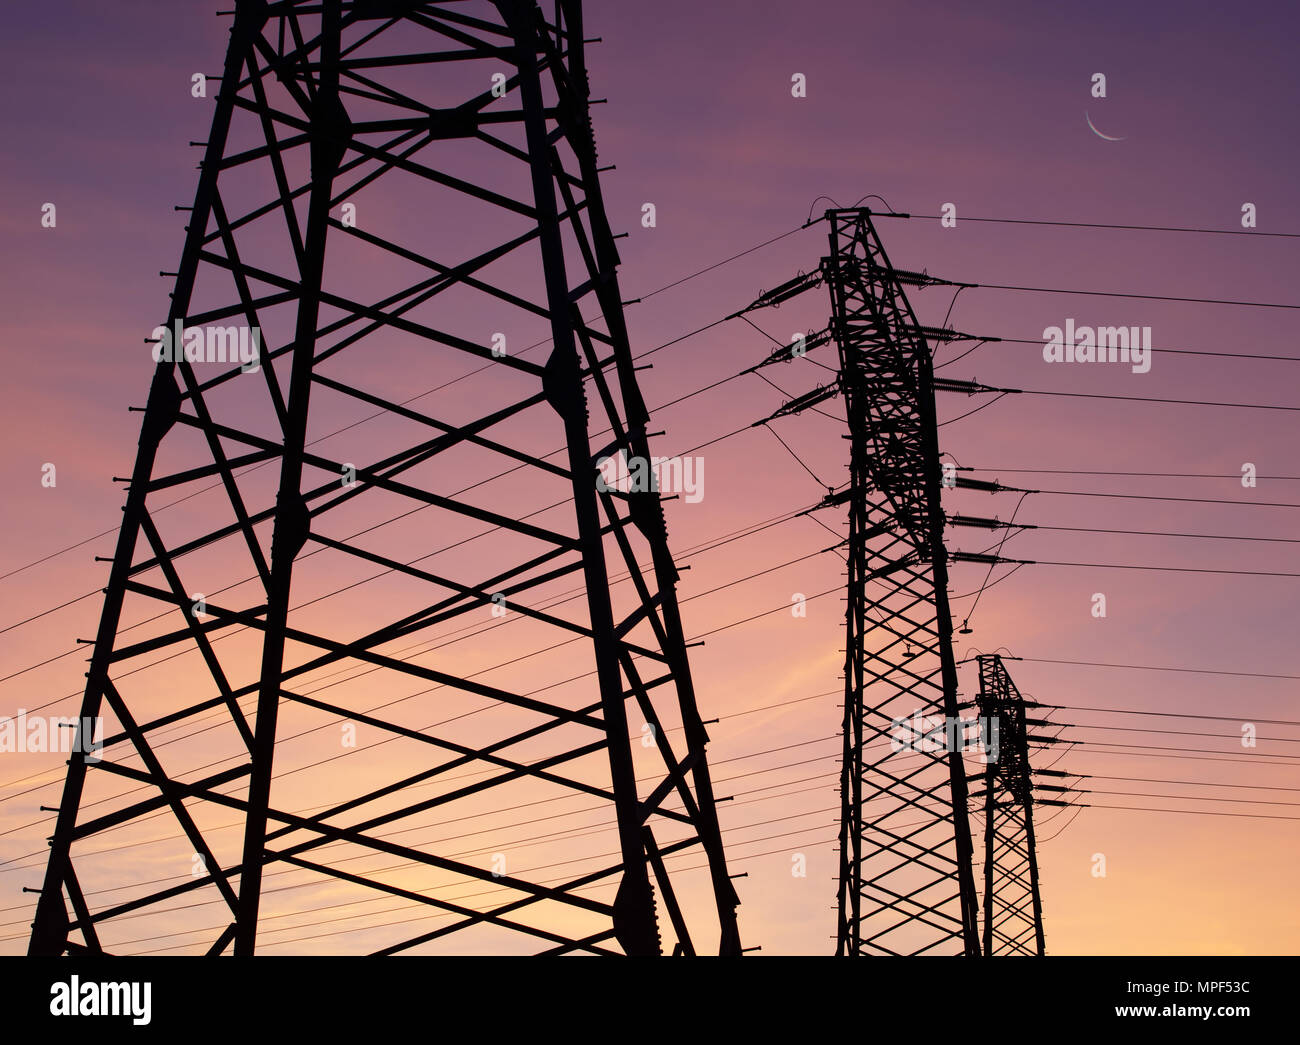 Three electricity pylons with cables are staggered as silhouettes in front of a colored evening sky. The moon can be seen as a narrow sickle. Stock Photo